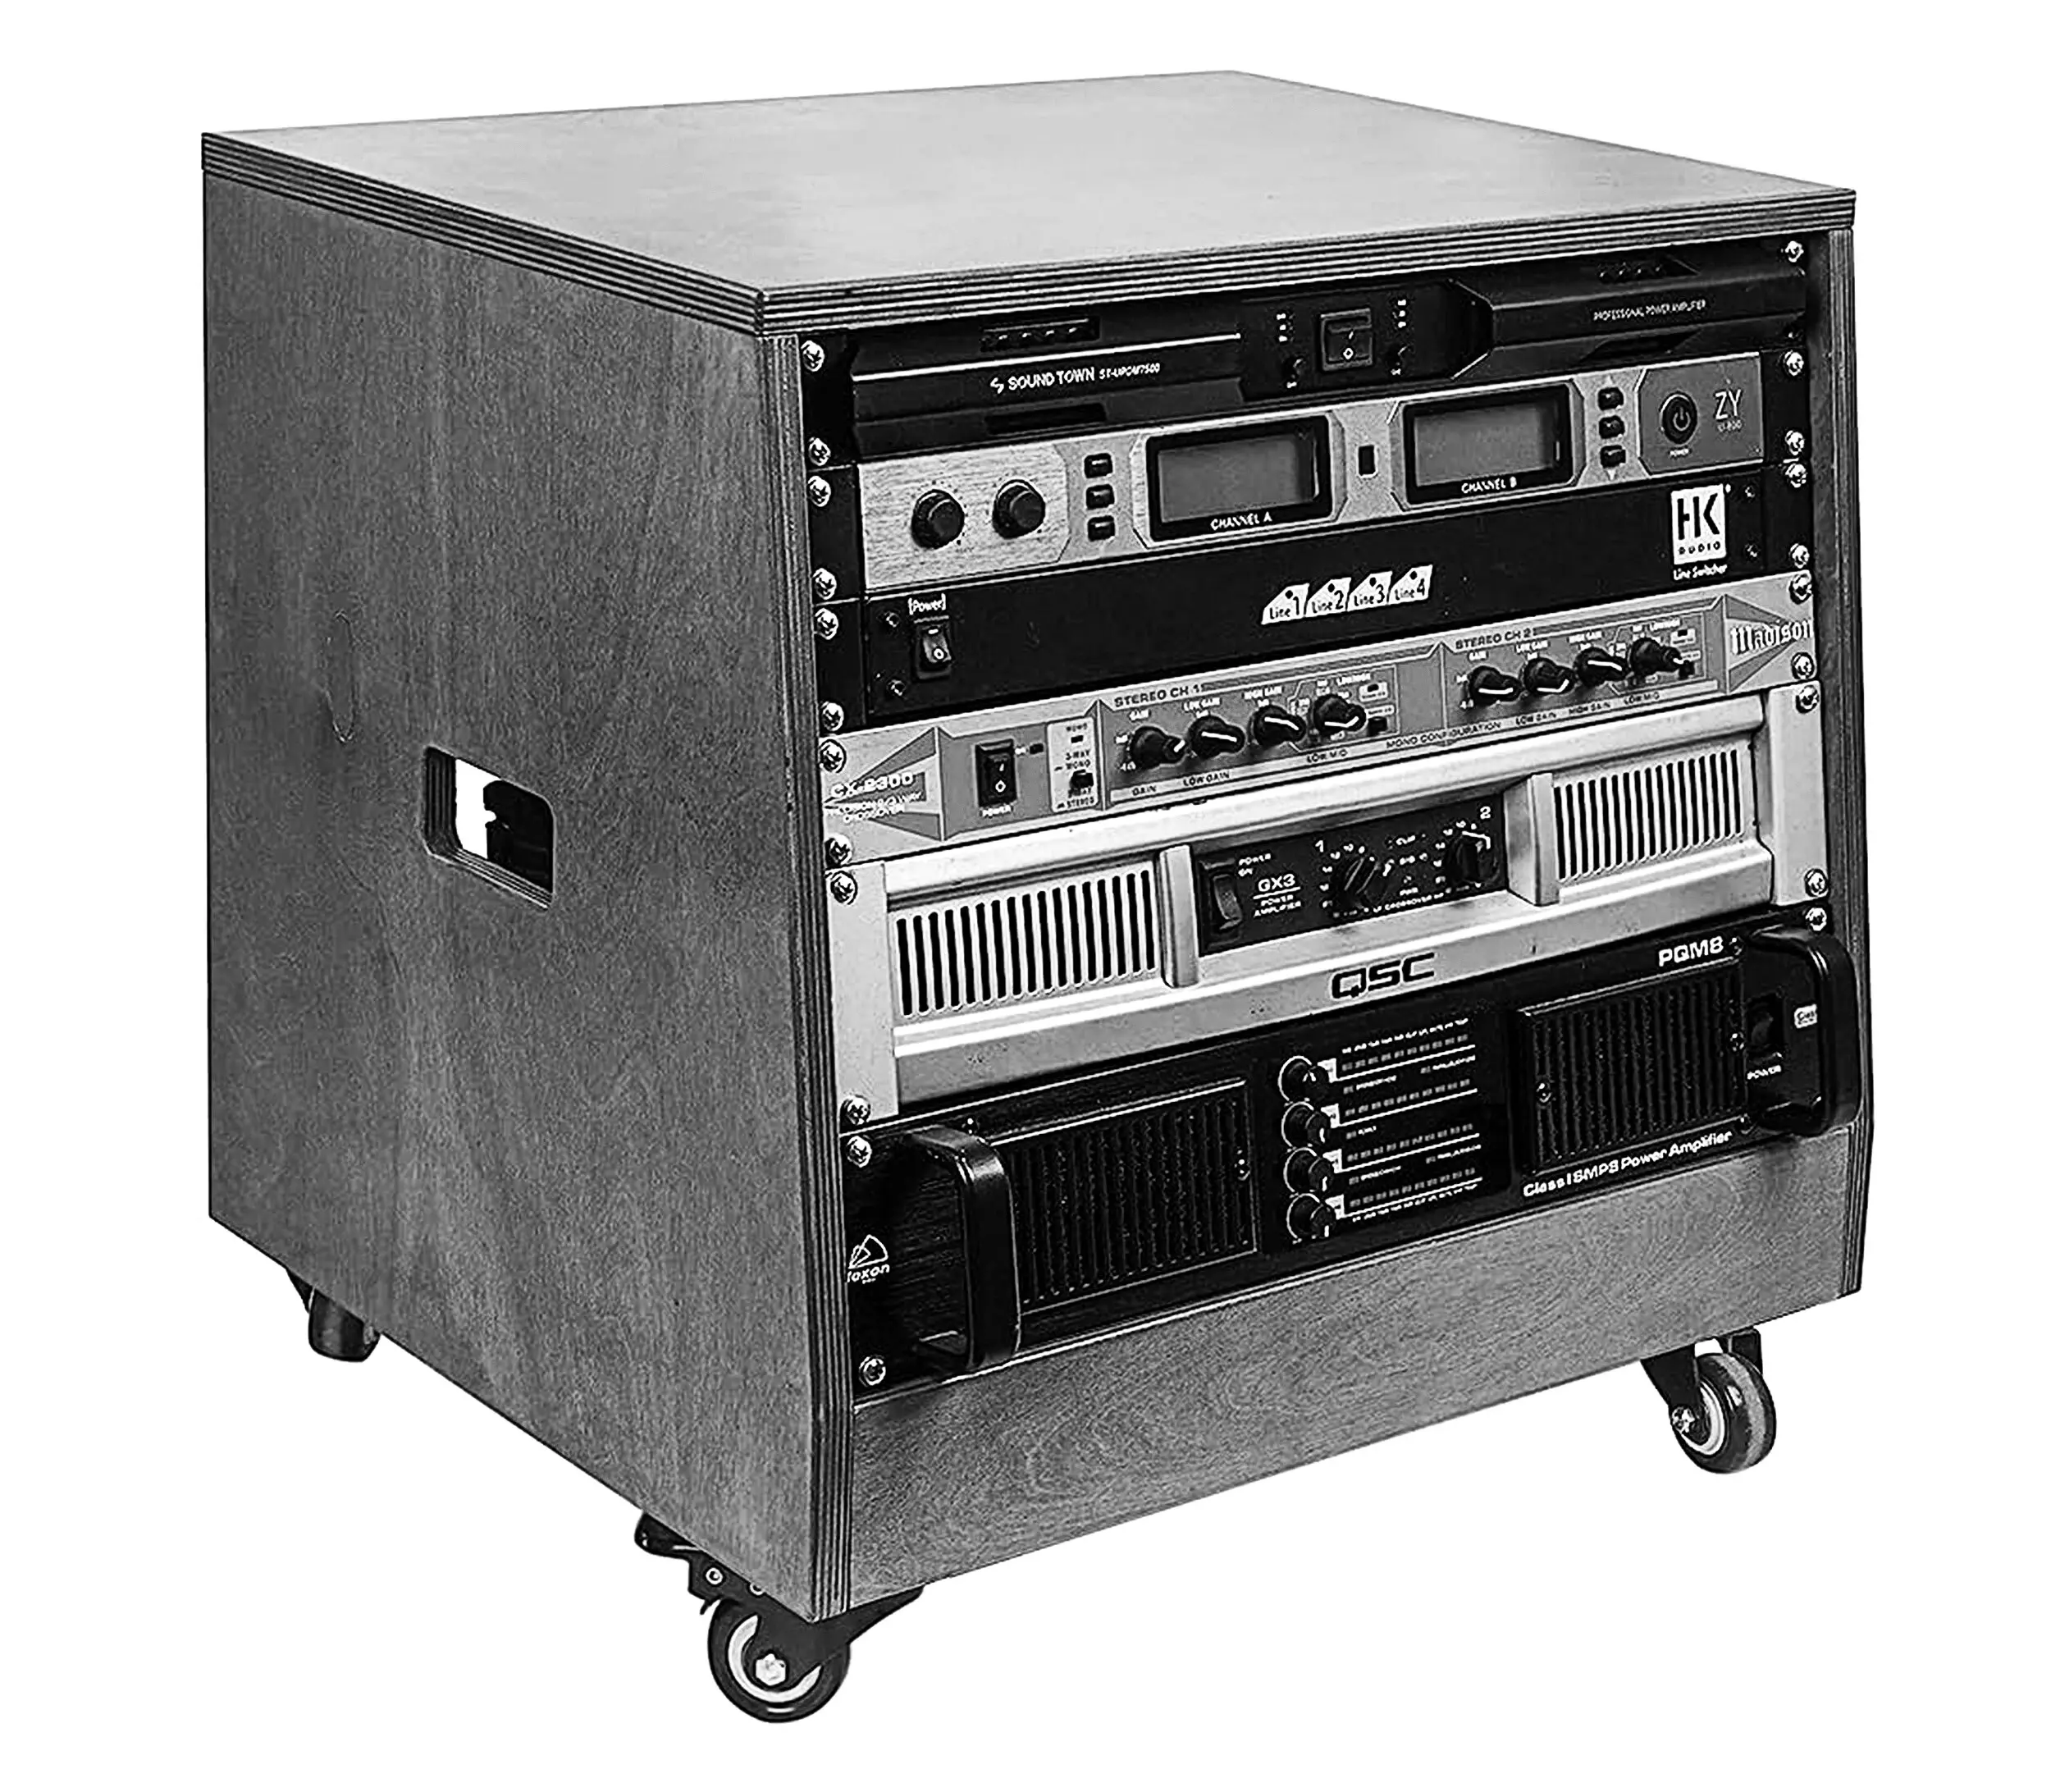 "U" denotes a modular unit used to determine the vertical rack space in sound engineering. The standard height of one U is 1.75 inches (44.45 mm), providing a framework for compatibility among various devices.
